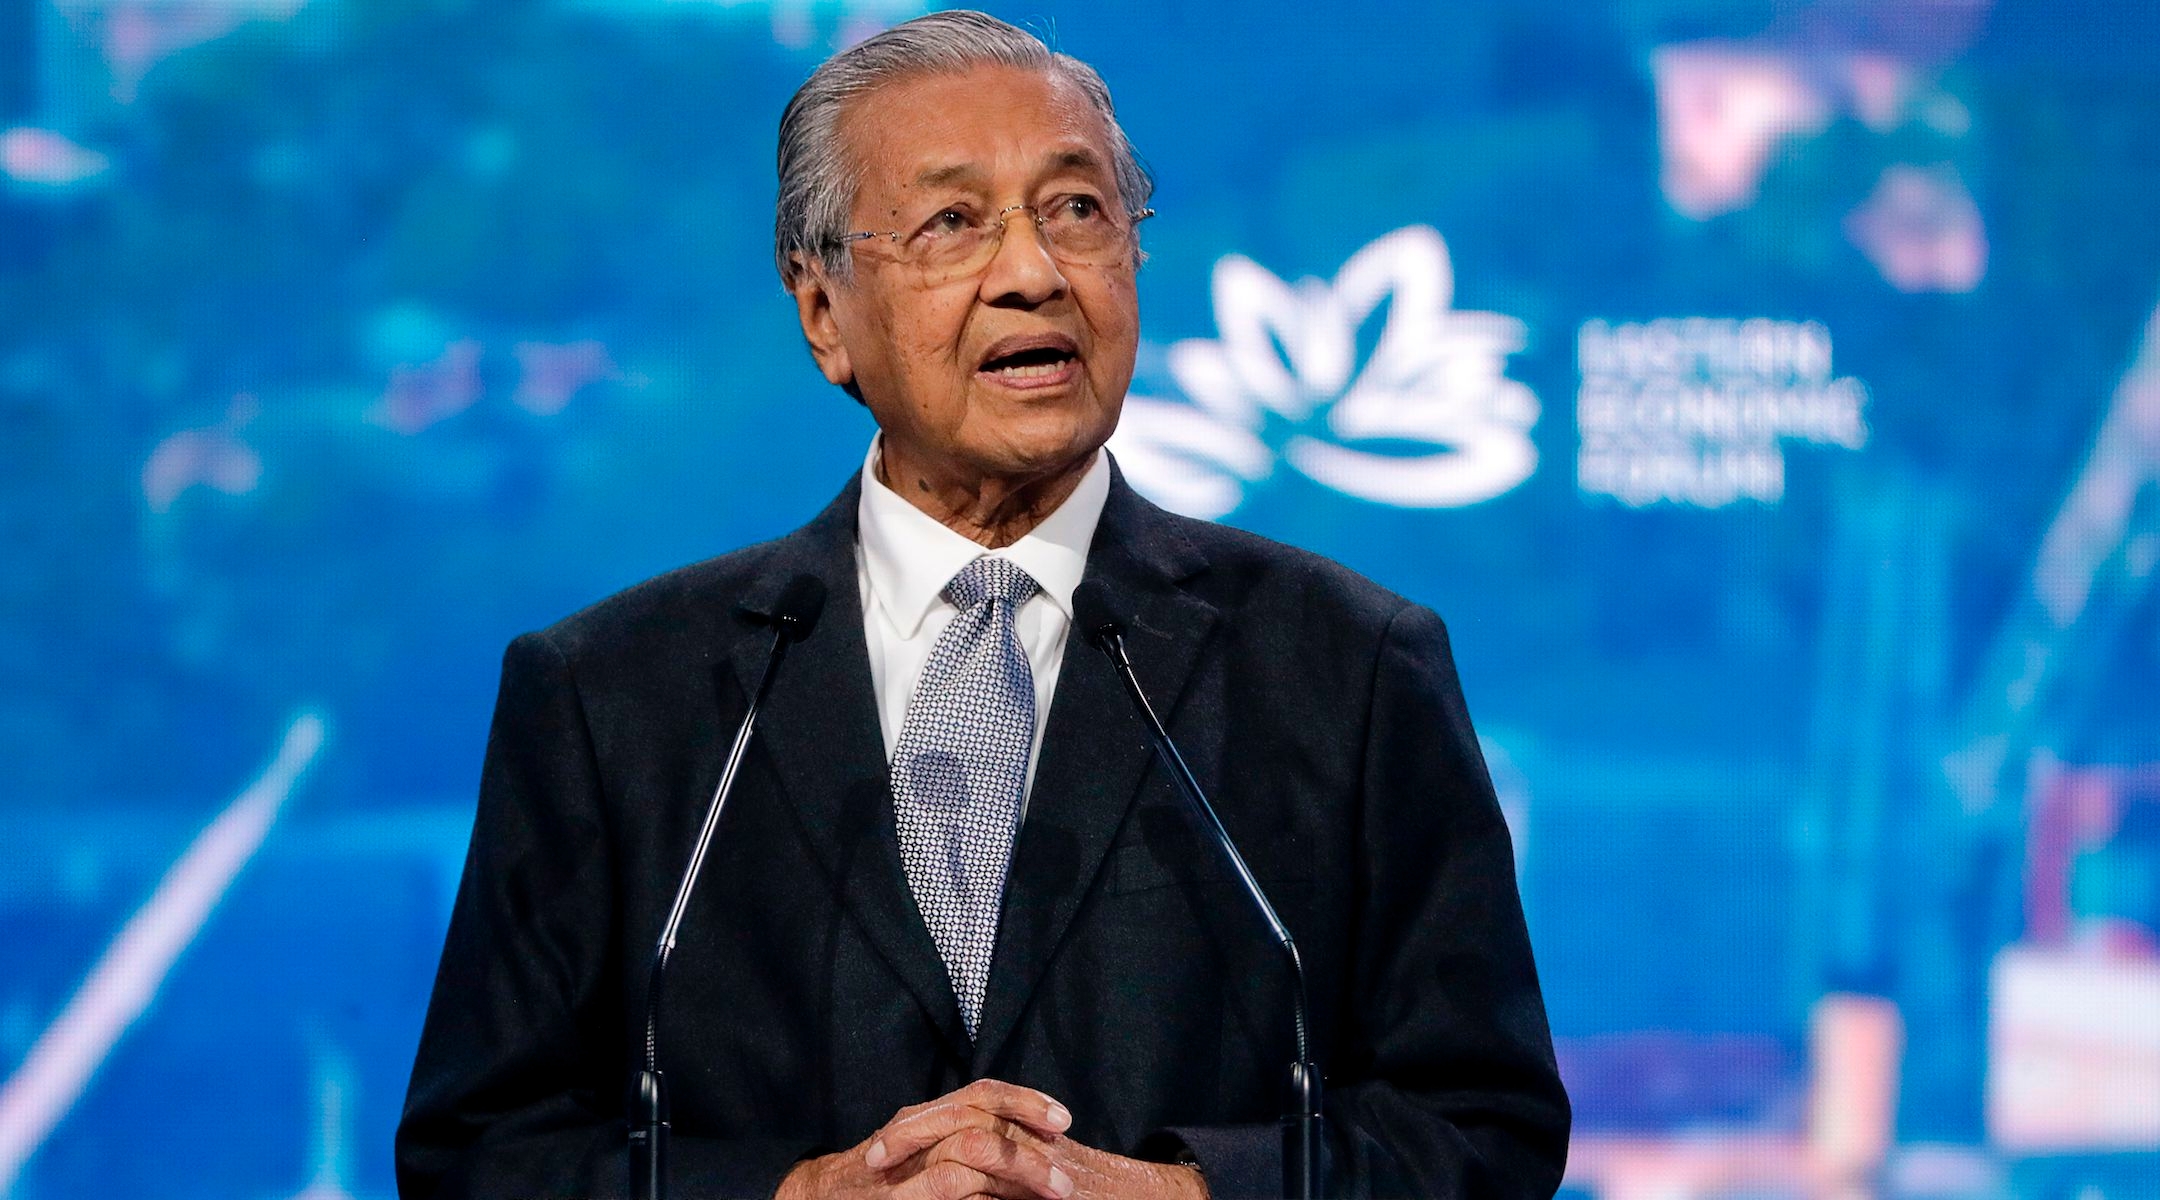 Malaysia’s prime minister, who said he is proud to be called anti-Semitic, is speaking at Columbia University